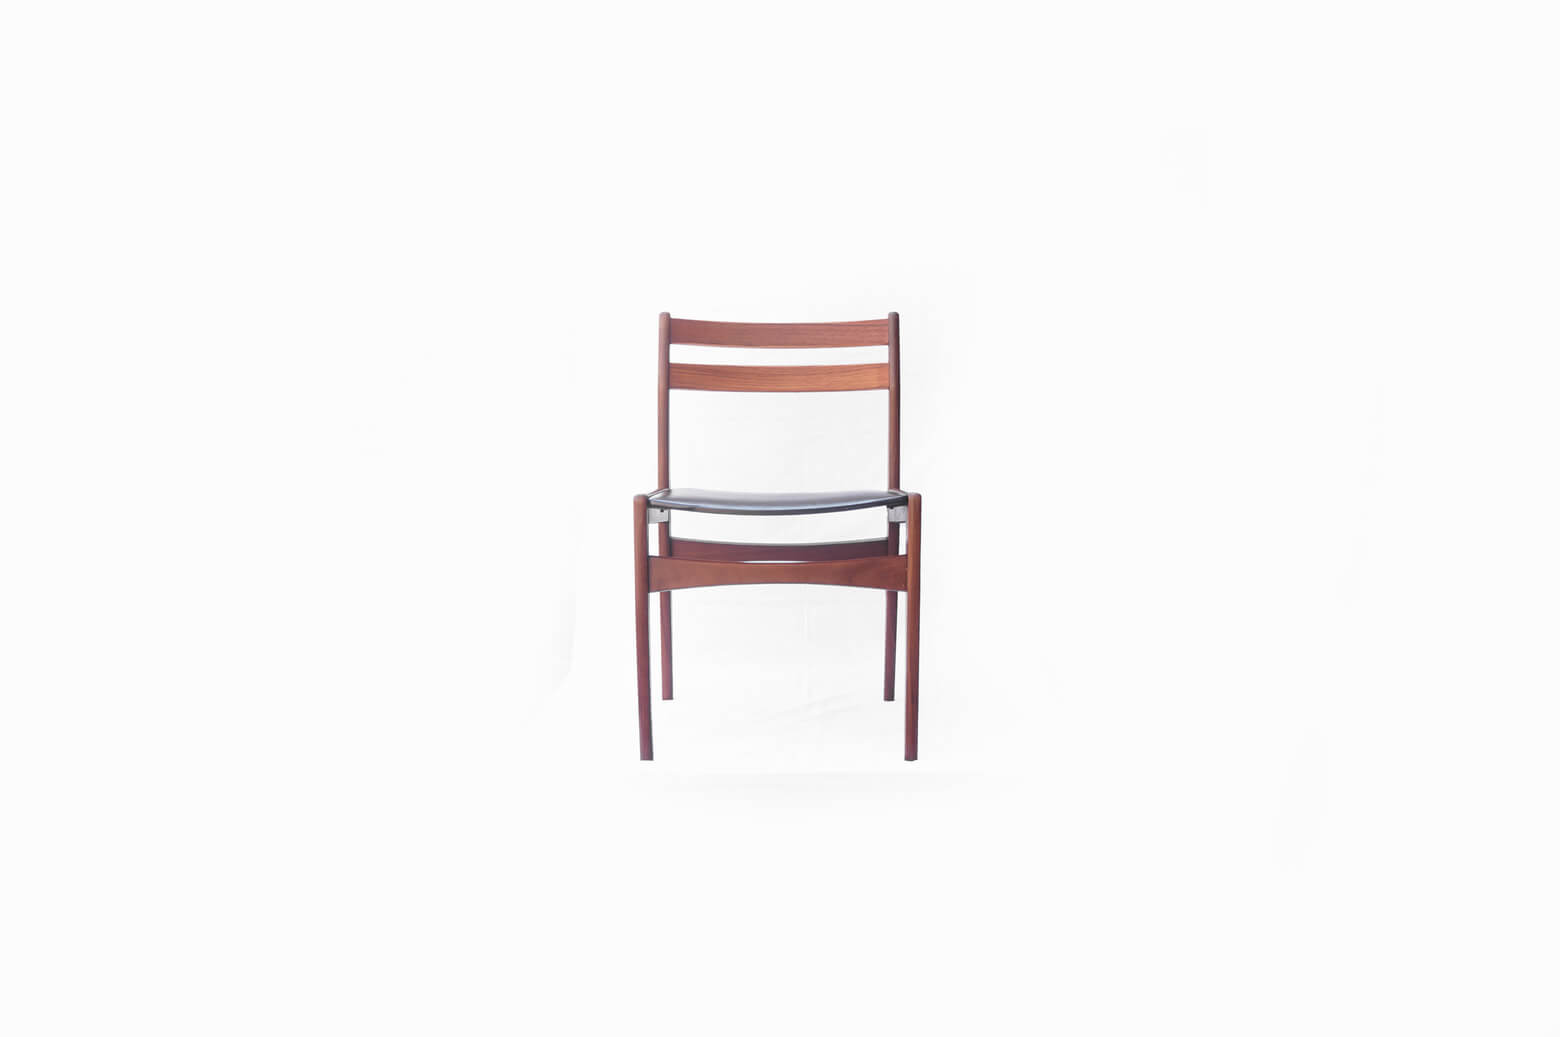 Danish Vintage Frem Røjle Dining Chair designed by Poul M. Volther/デンマーク ヴィンテージ フレムロジェ ダイニングチェア ポール・M・ヴォルター 1